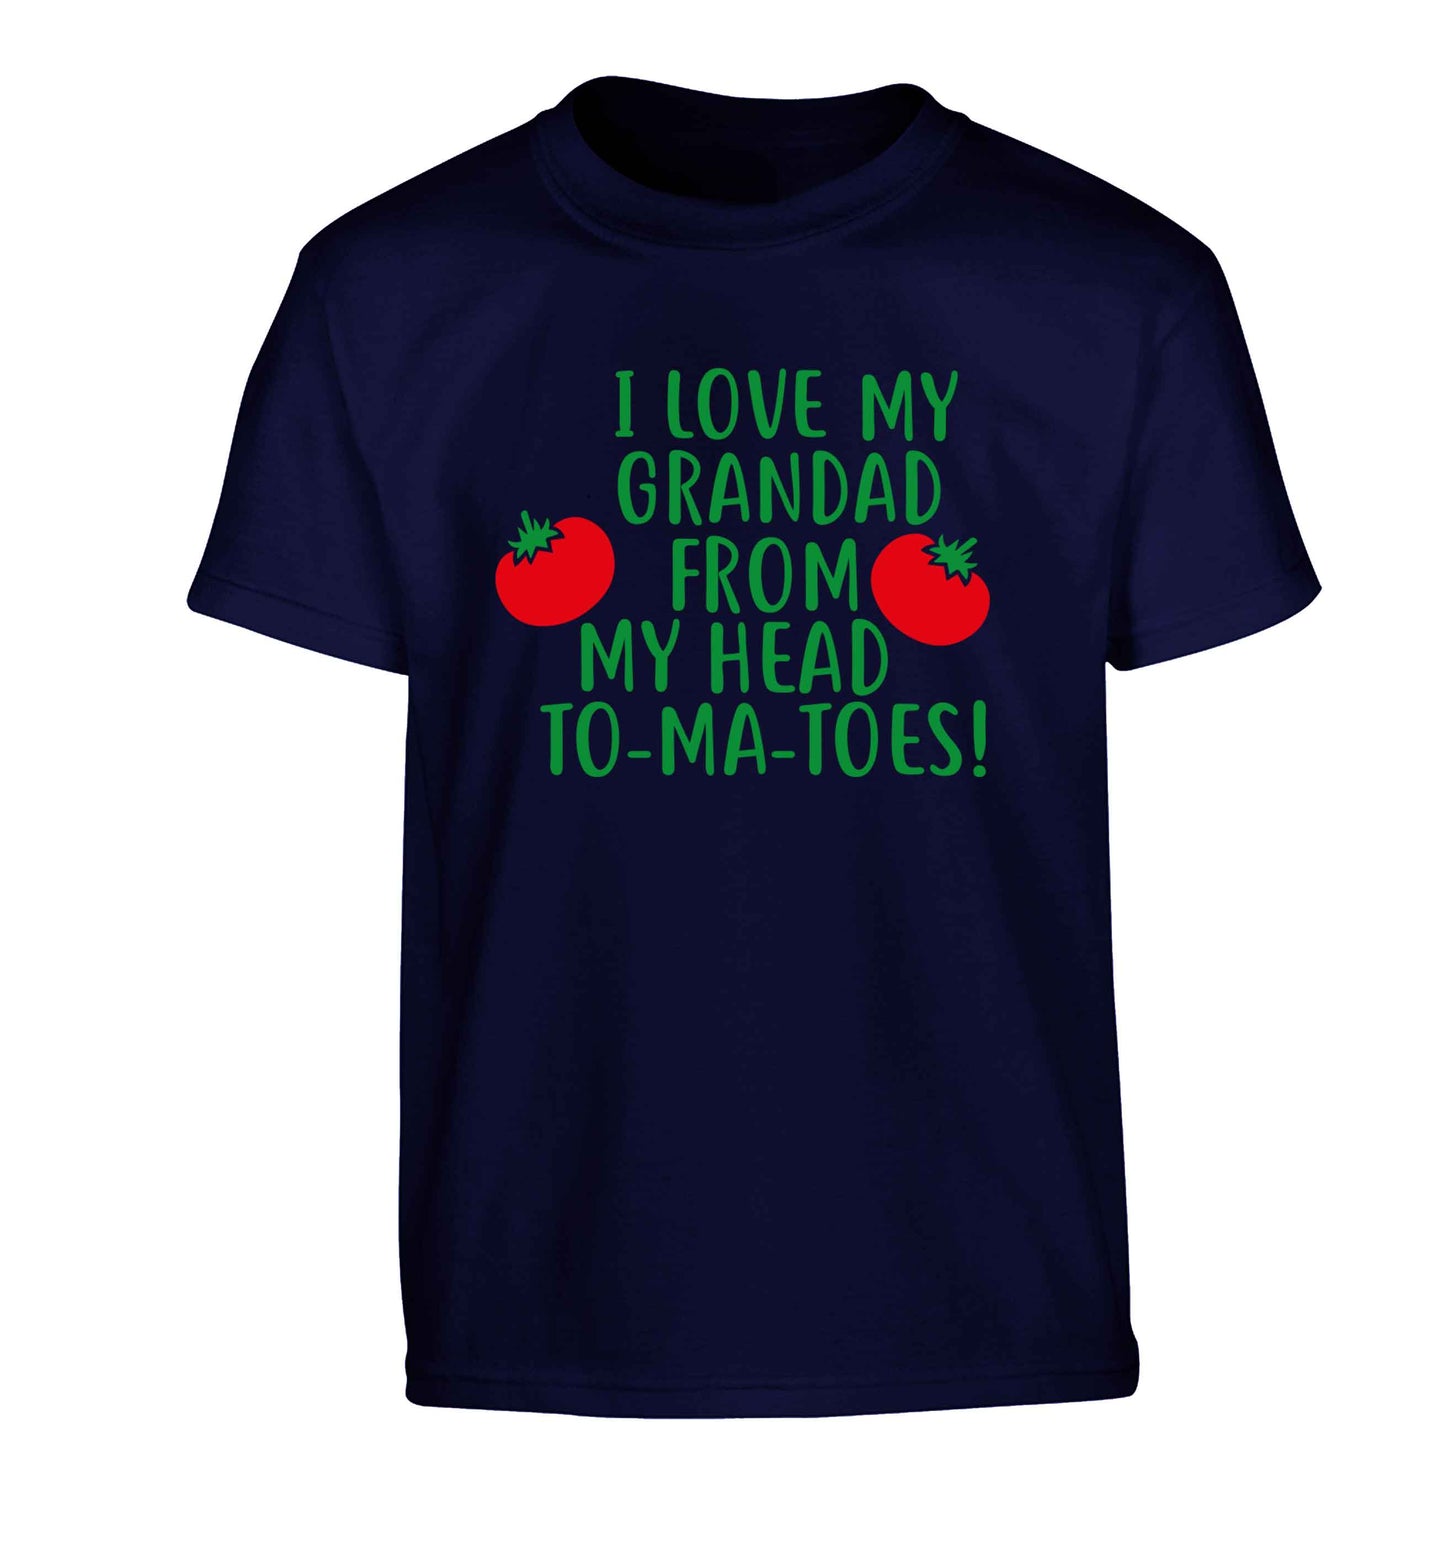 I love my grandad from my head To-Ma-Toes Children's navy Tshirt 12-13 Years